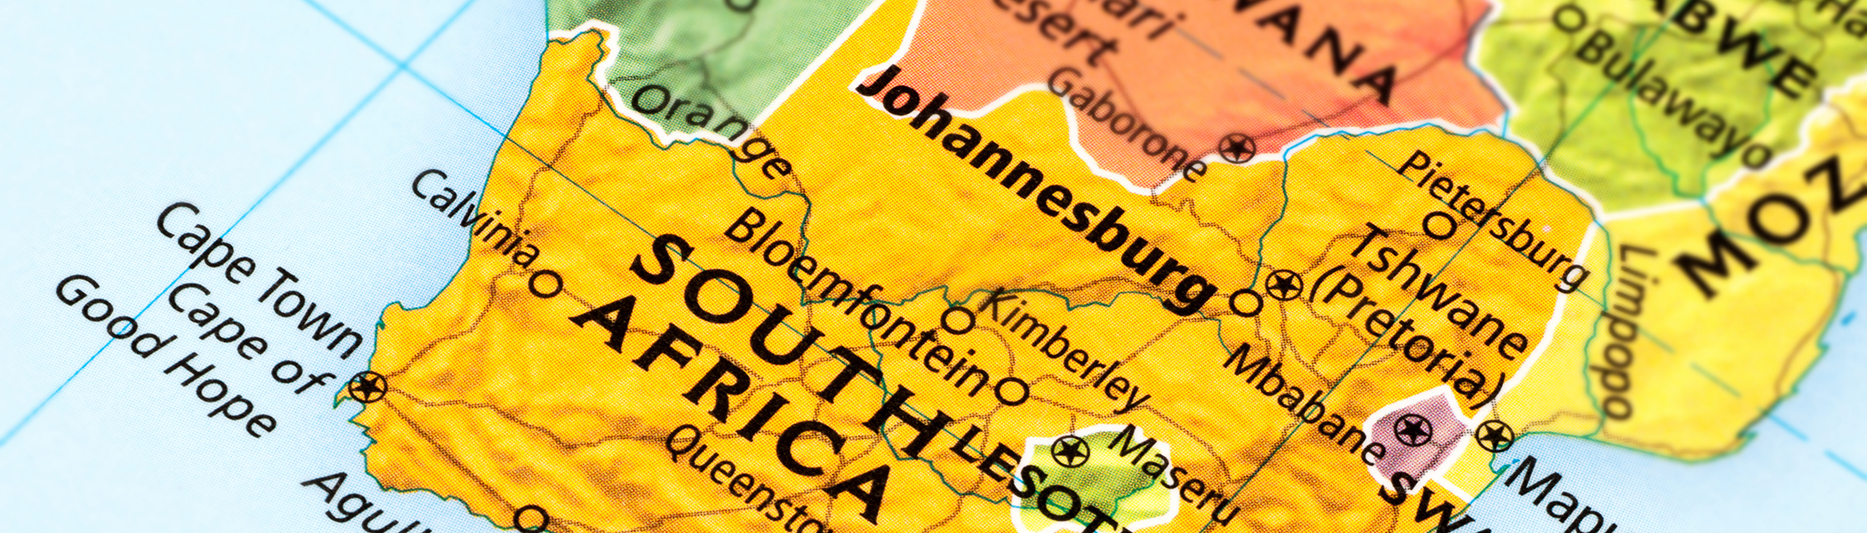 South Africa immigration 2021 outlook FAQ series (Part 3 of 4)